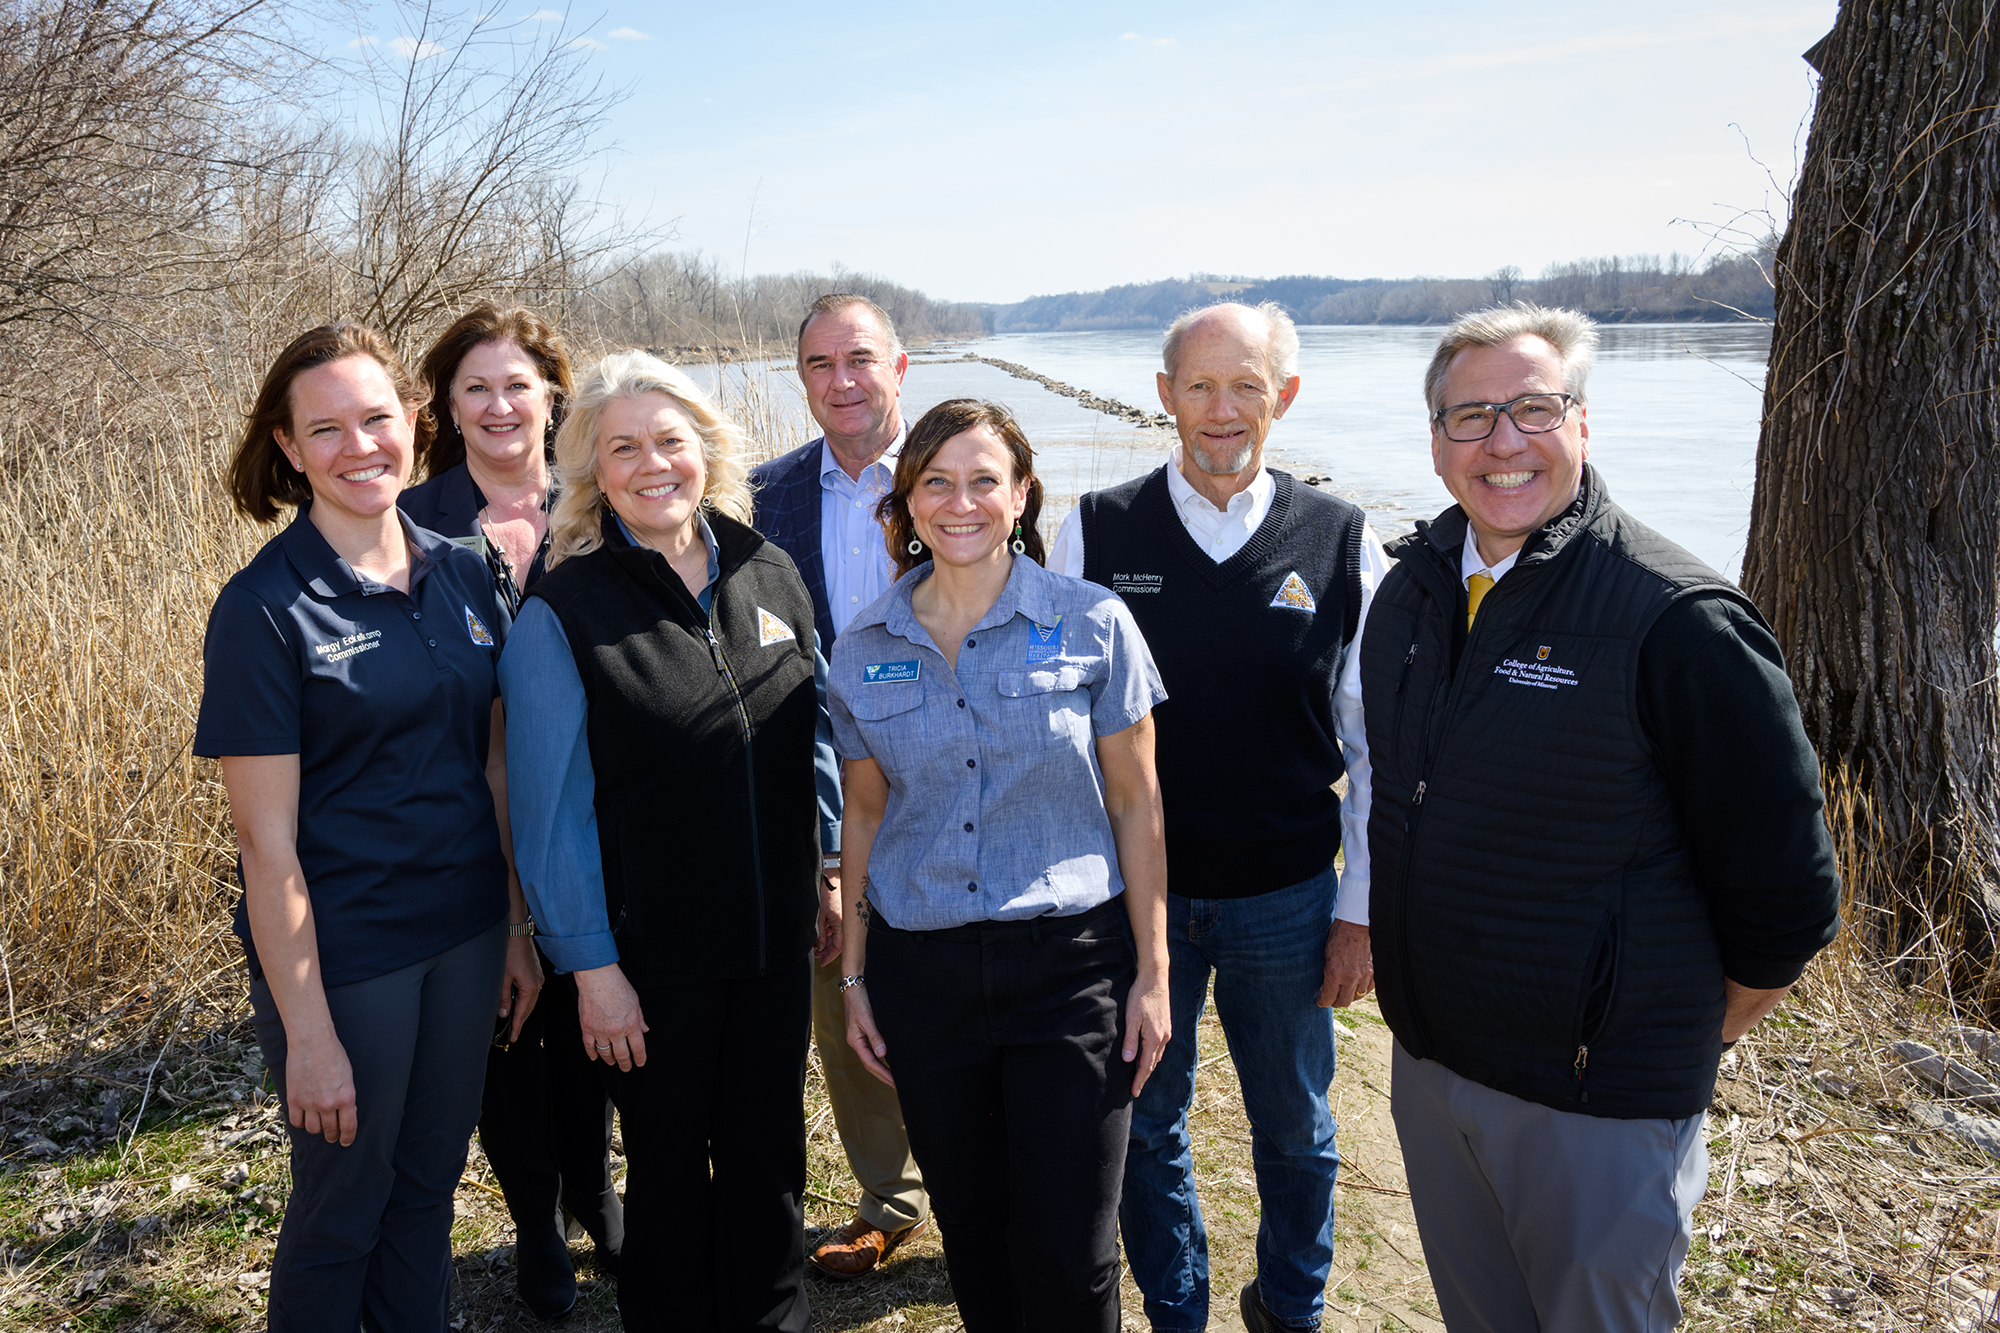 Group photo from left: From left: Margy Eckelkamp, Missouri Conservation commissioner; Jackie Lewis, vice chancellor for advancement; Sara Parker Pauley, director of the Missouri Department of Conservation; Missouri Lt. Governor Mike Kehoe; Tricia Burkhardt, executive director of the Missouri Conservation Heritage Foundation; Mark McHenry, Missouri Conservation commissioner; and Christopher Daubert, vice chancellor and dean of the College of Agriculture, Food and Natural Resources.